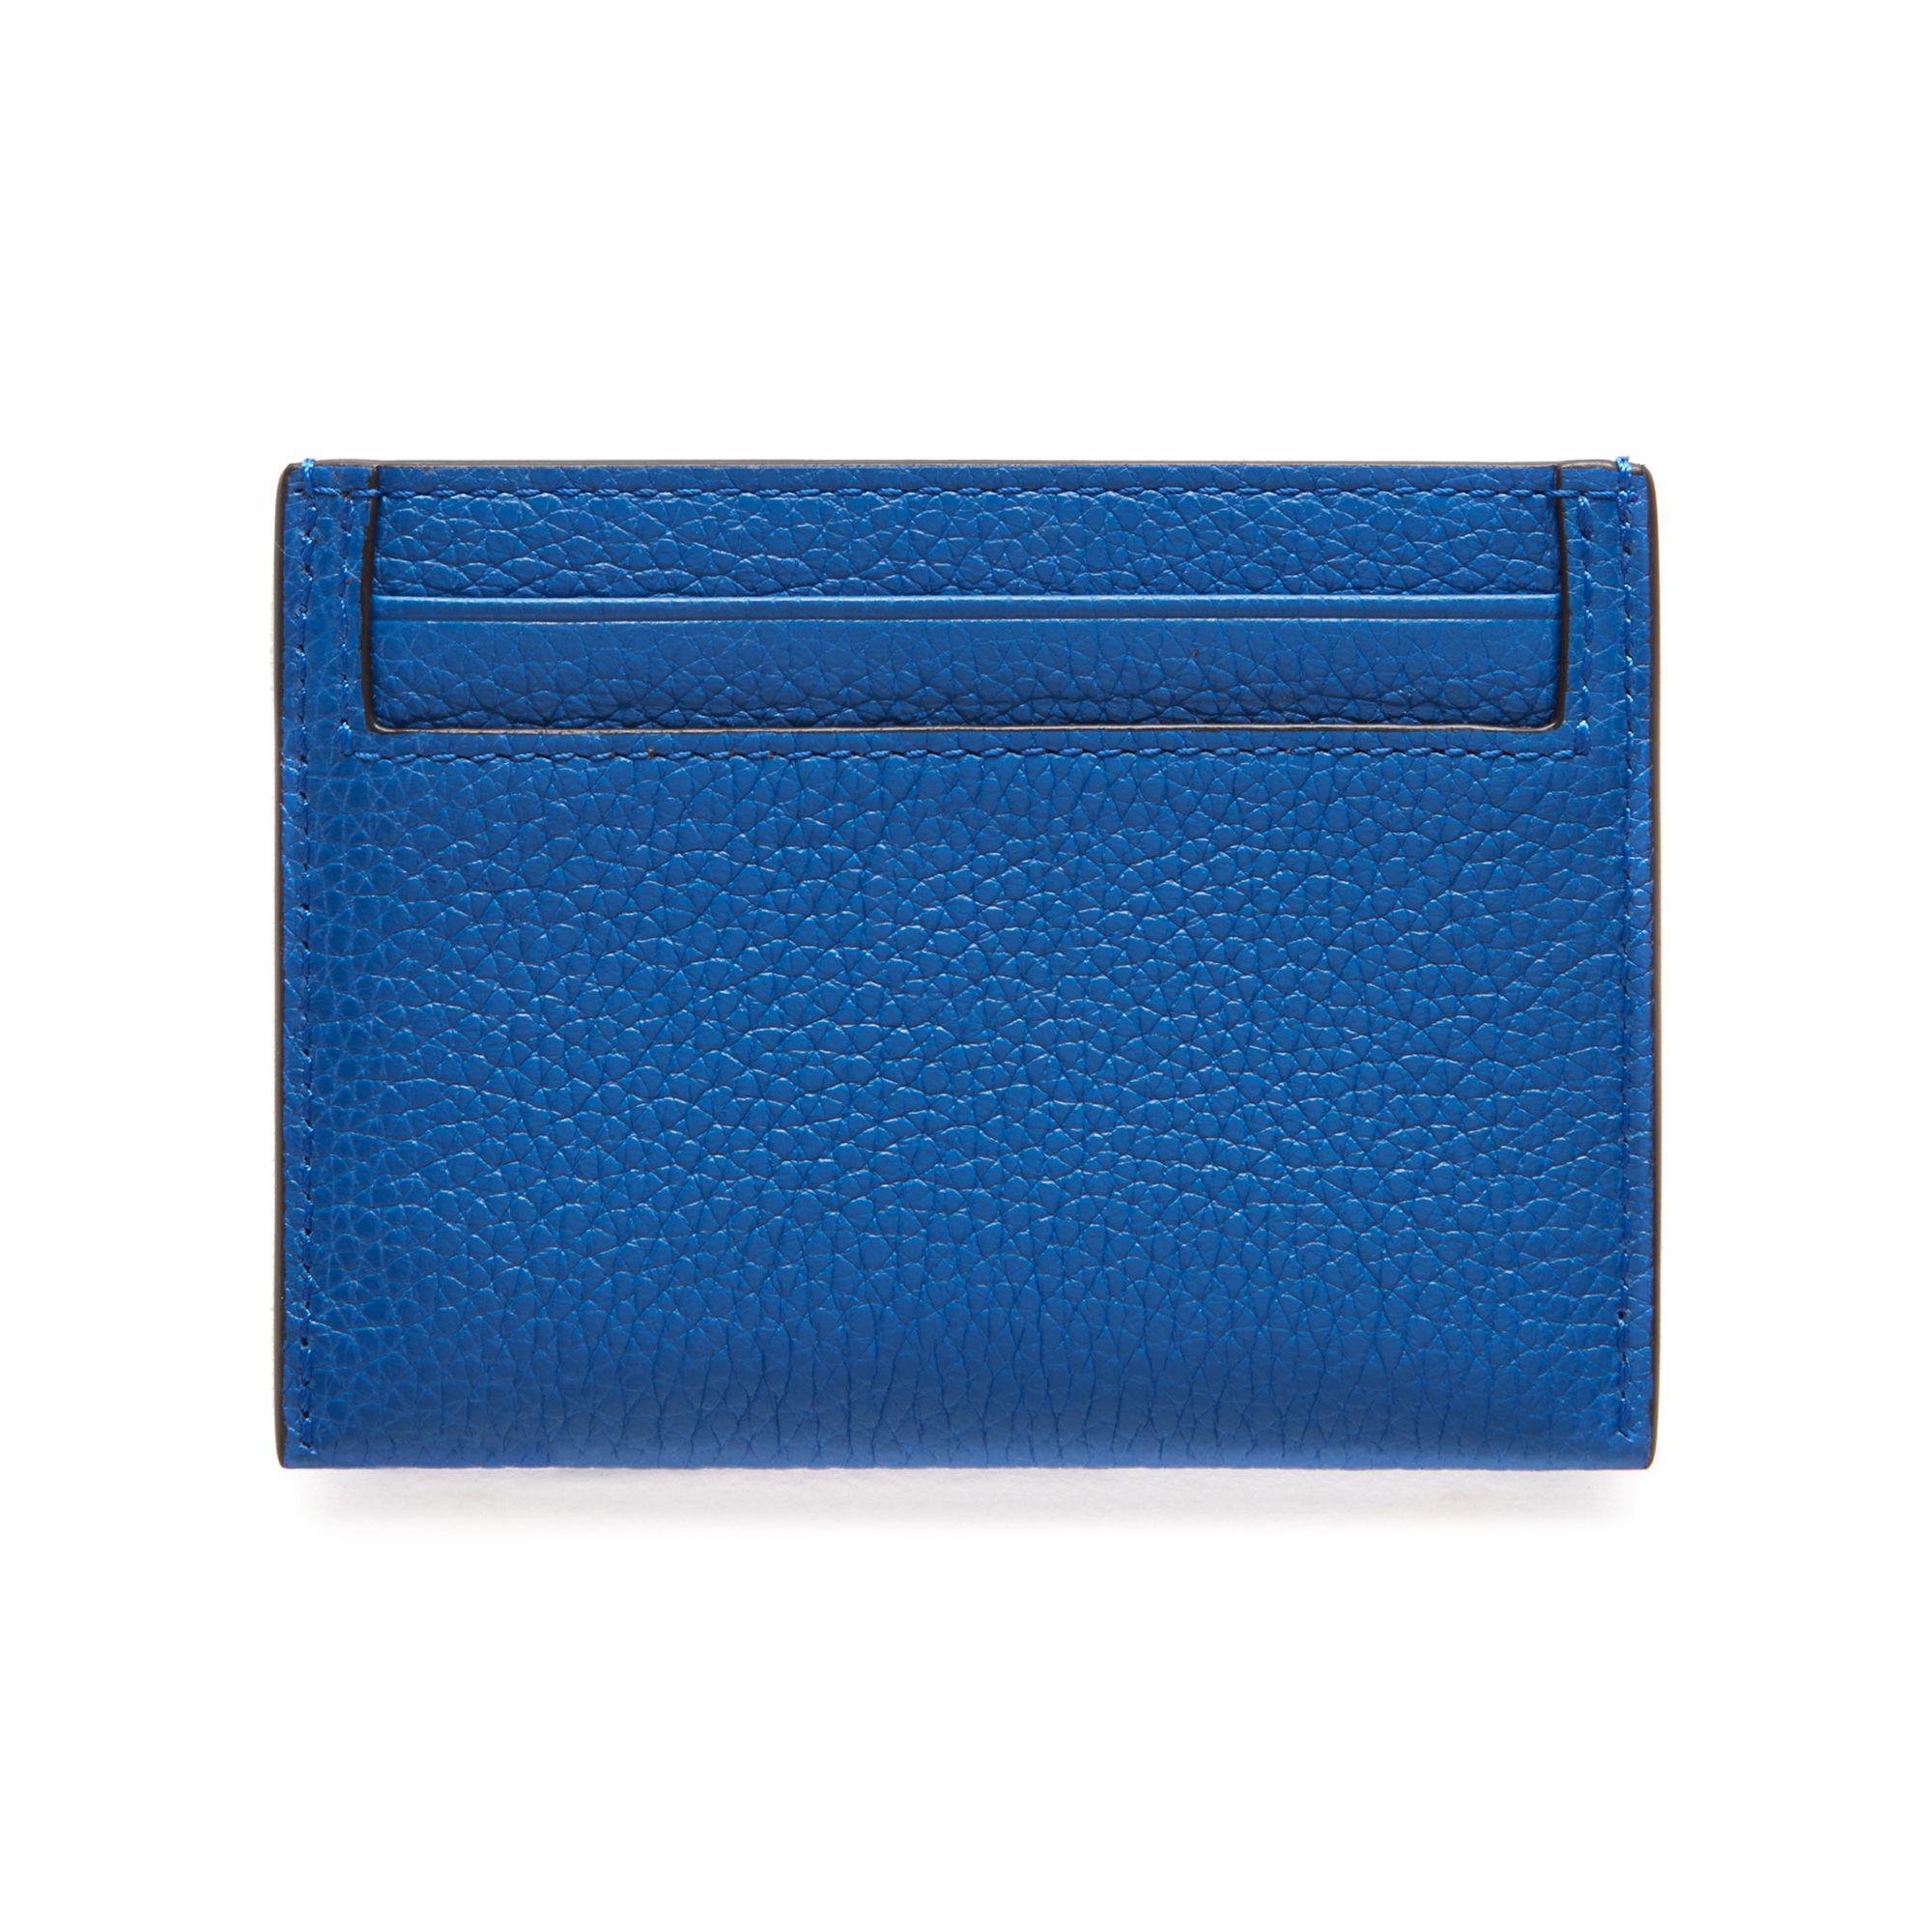 Lyst - Mulberry Credit Card Slip in Blue